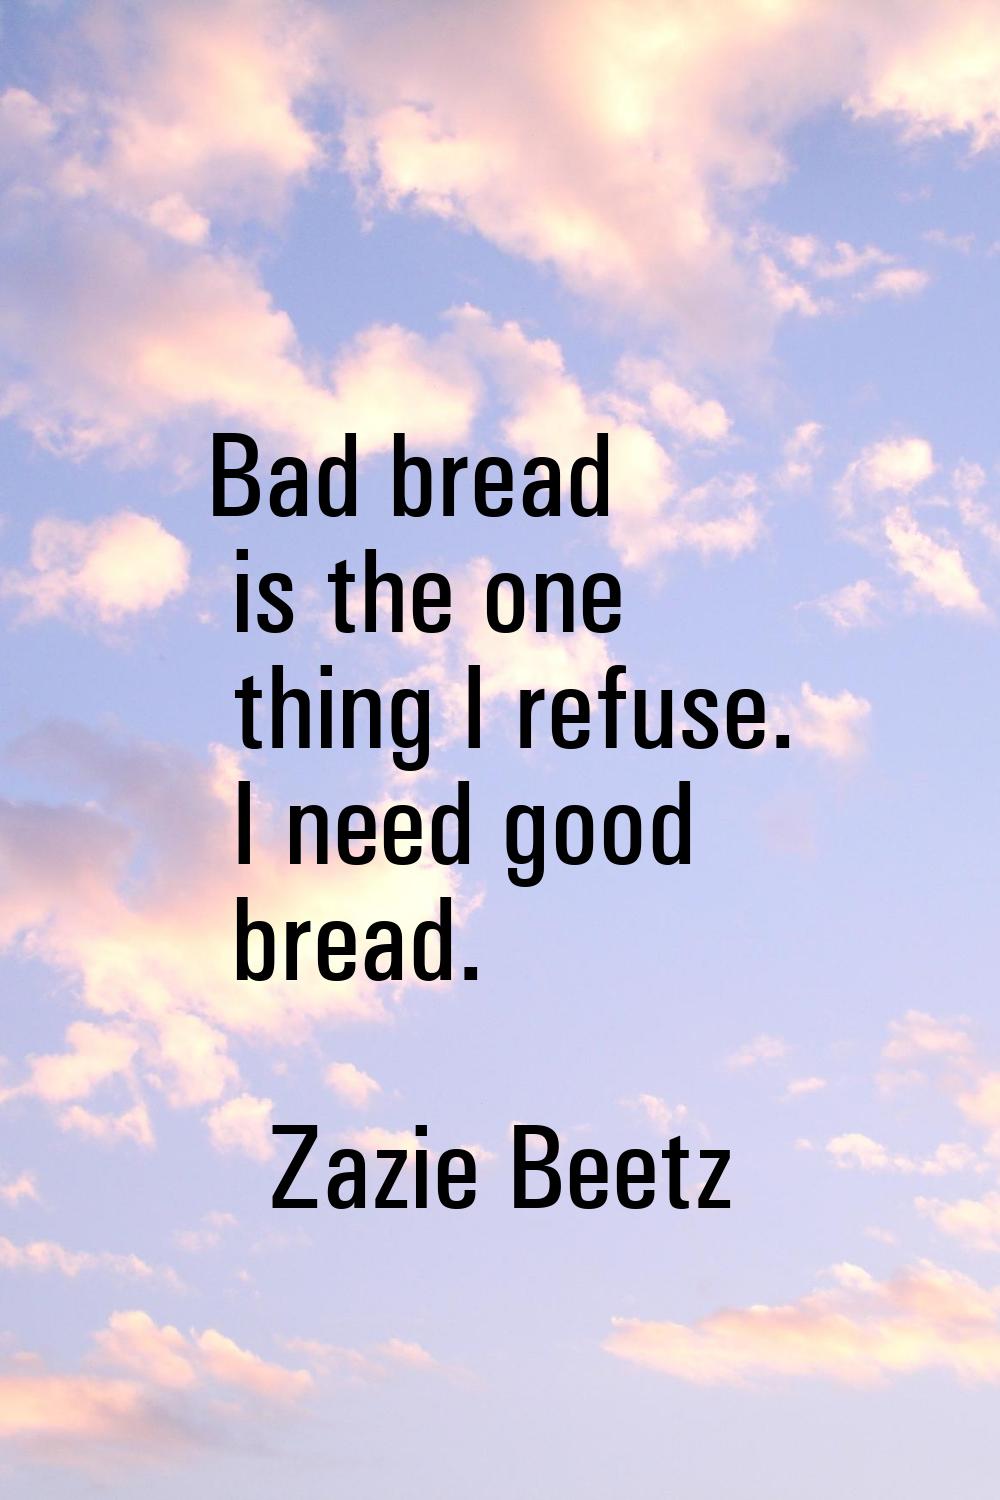 Bad bread is the one thing I refuse. I need good bread.